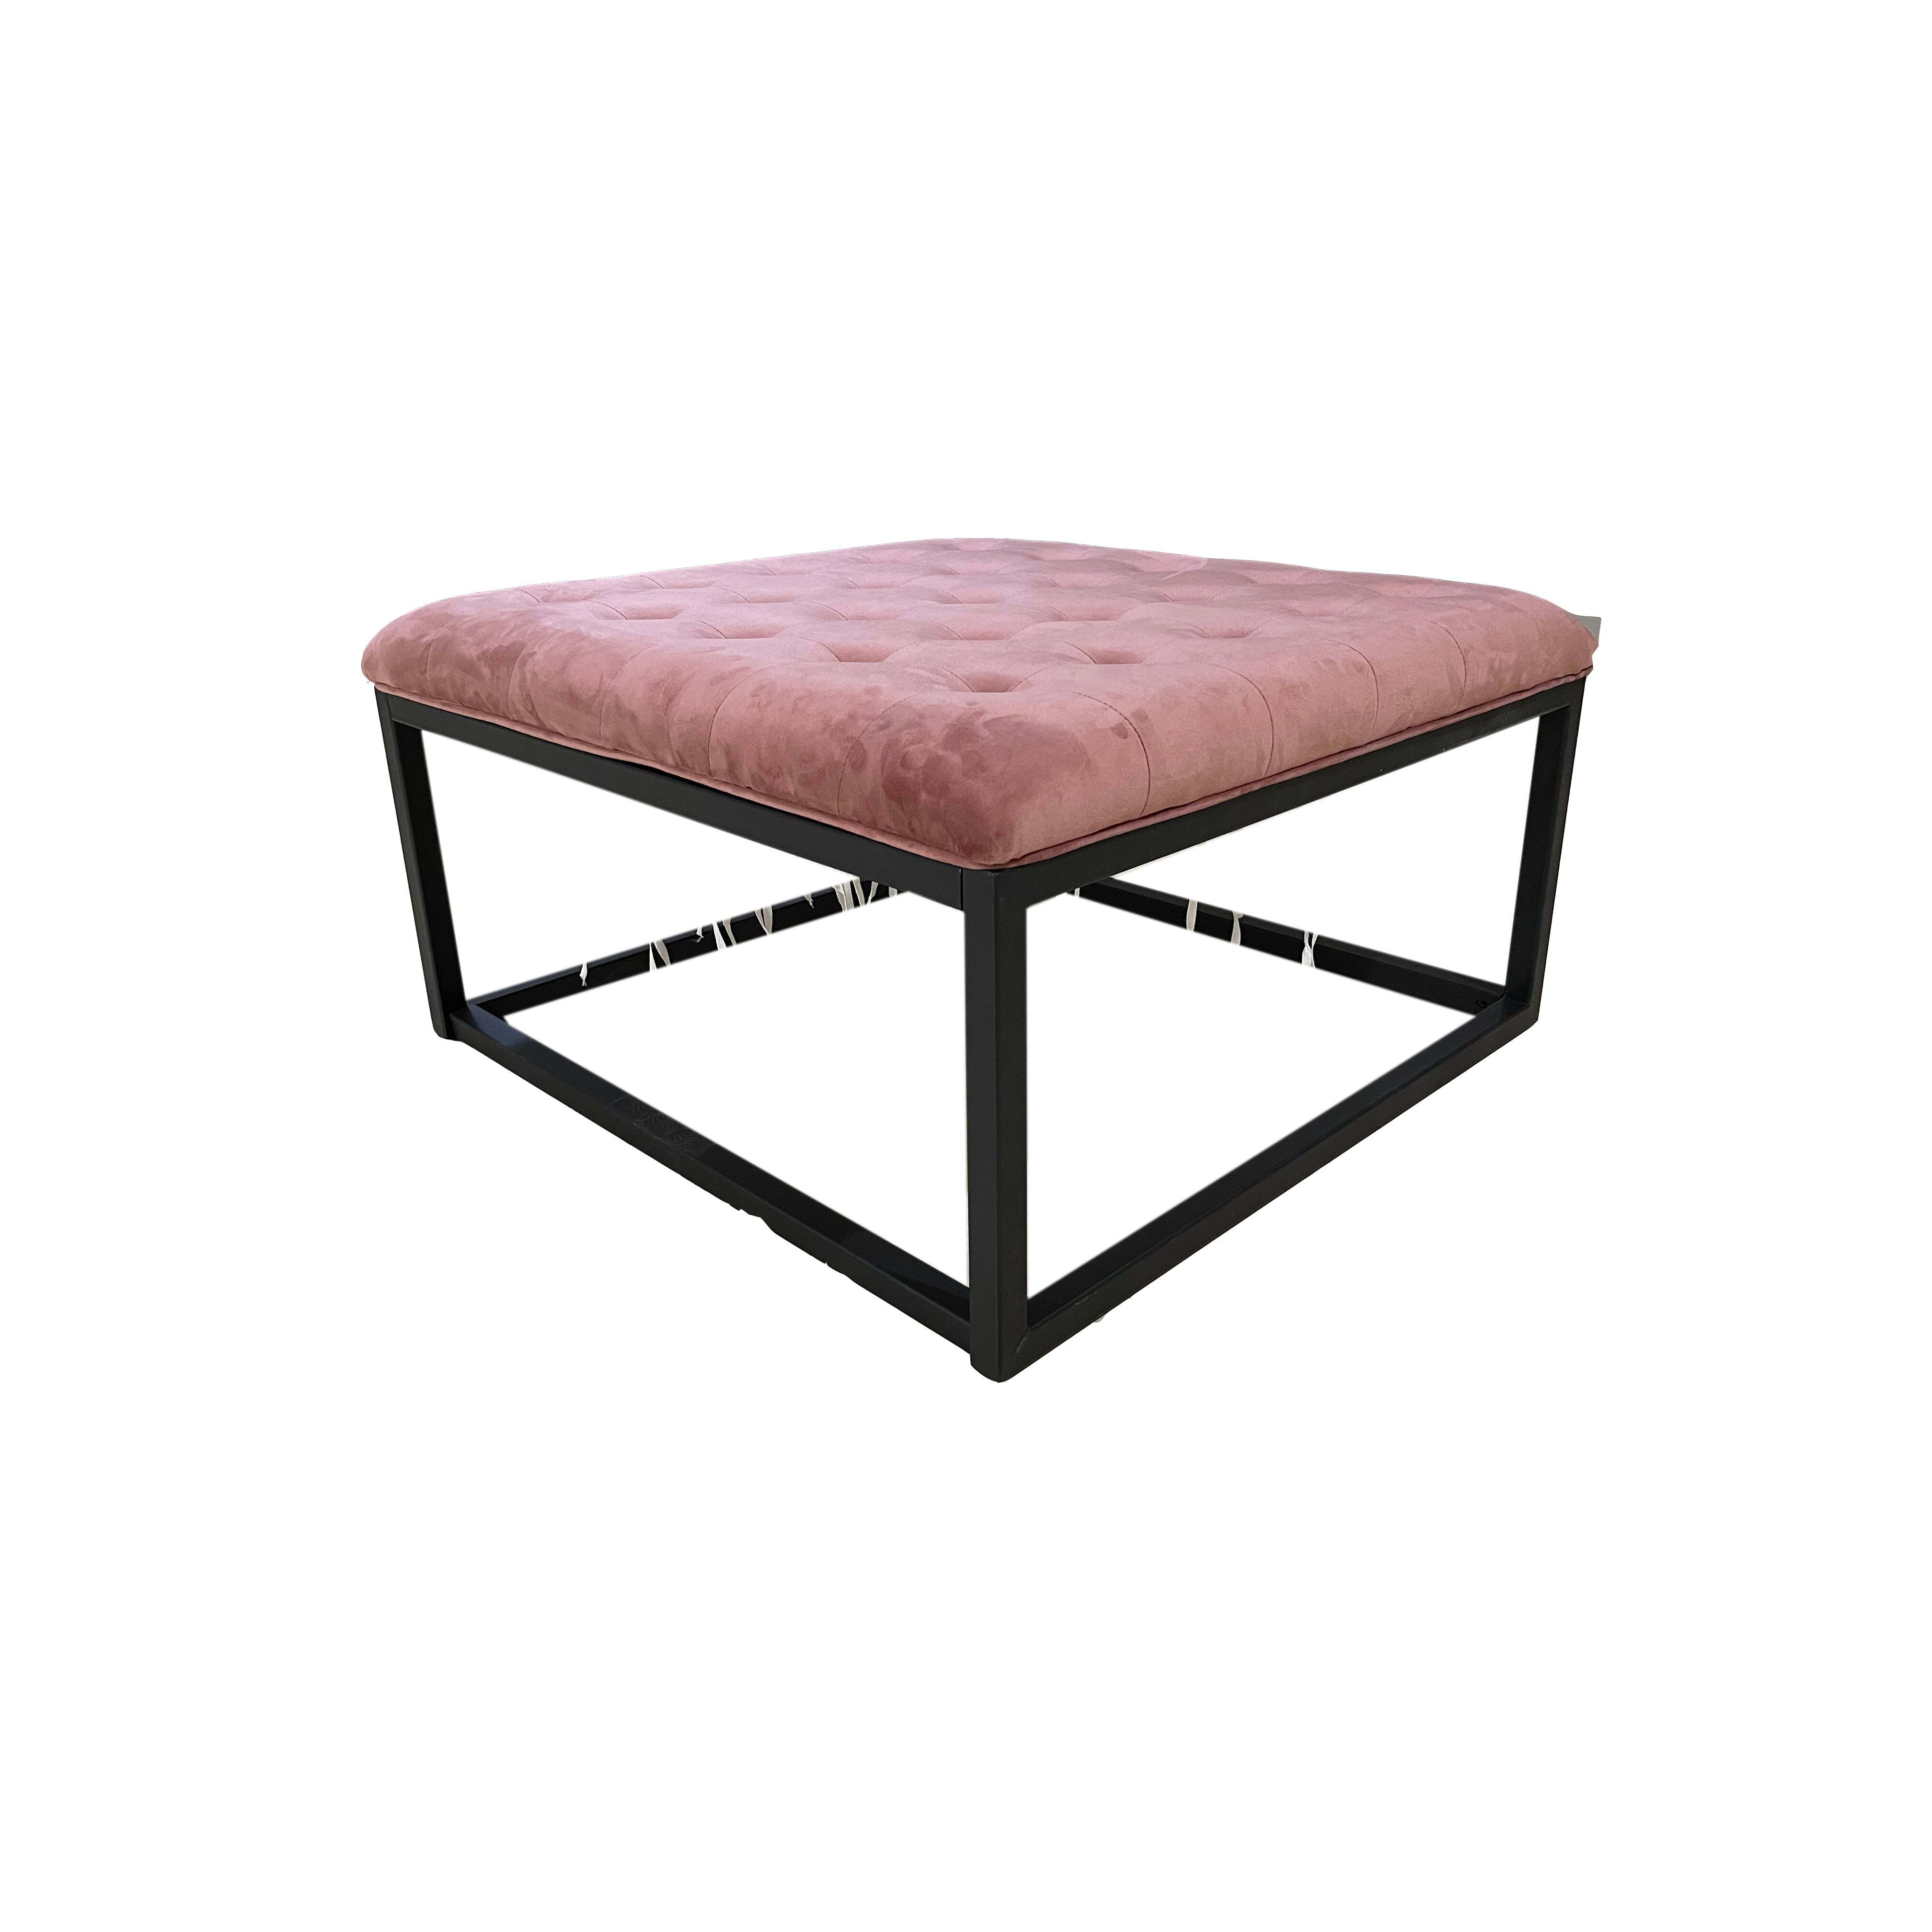 Teddy's Collection Falun Footstool Dusty Pink - image 1